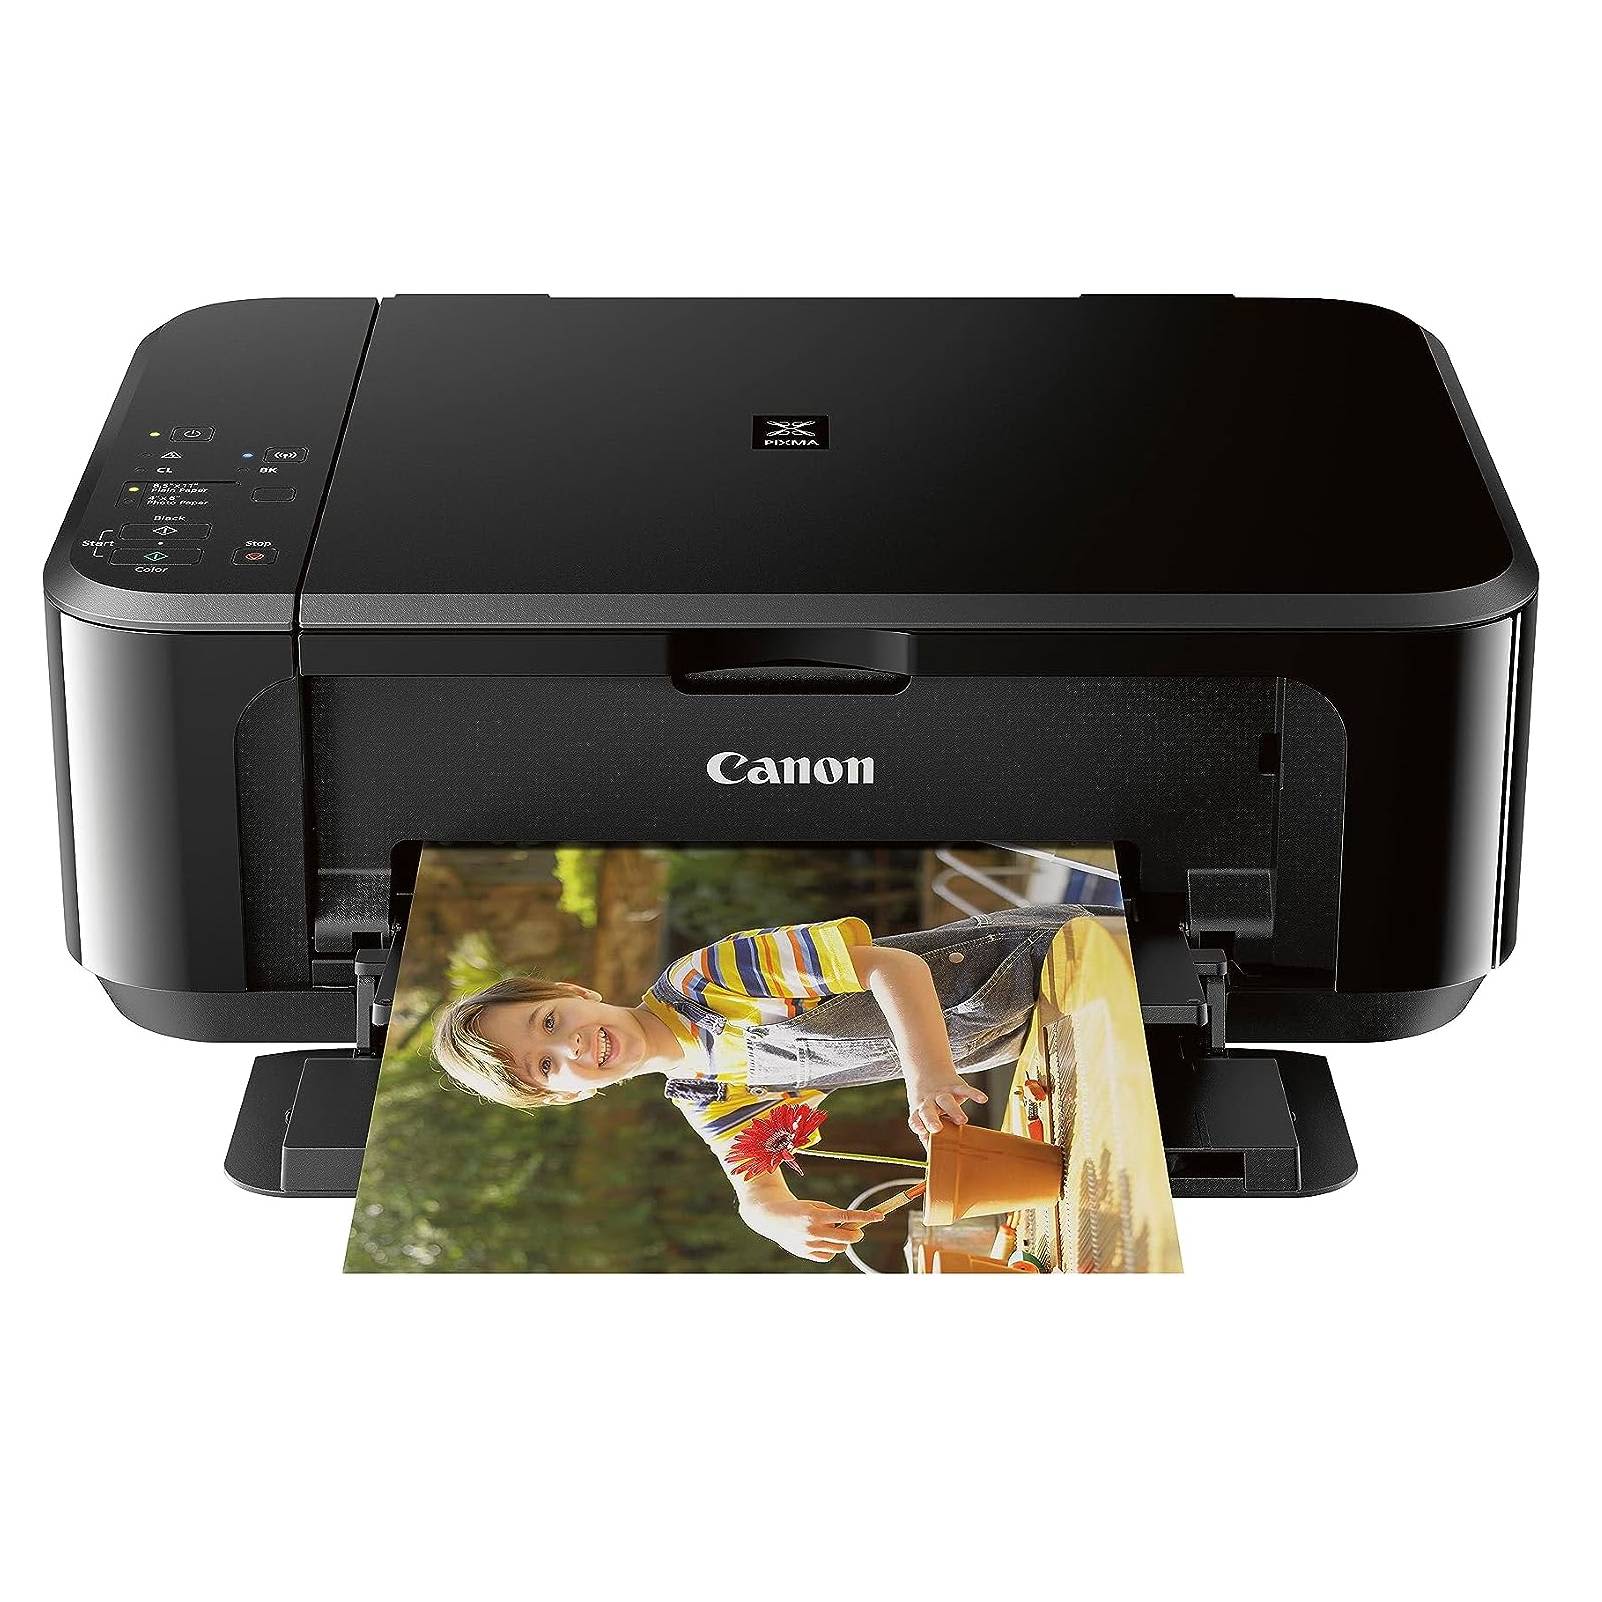 Types Of Printers: Pros, Cons, Uses & More - CartridgesDirect